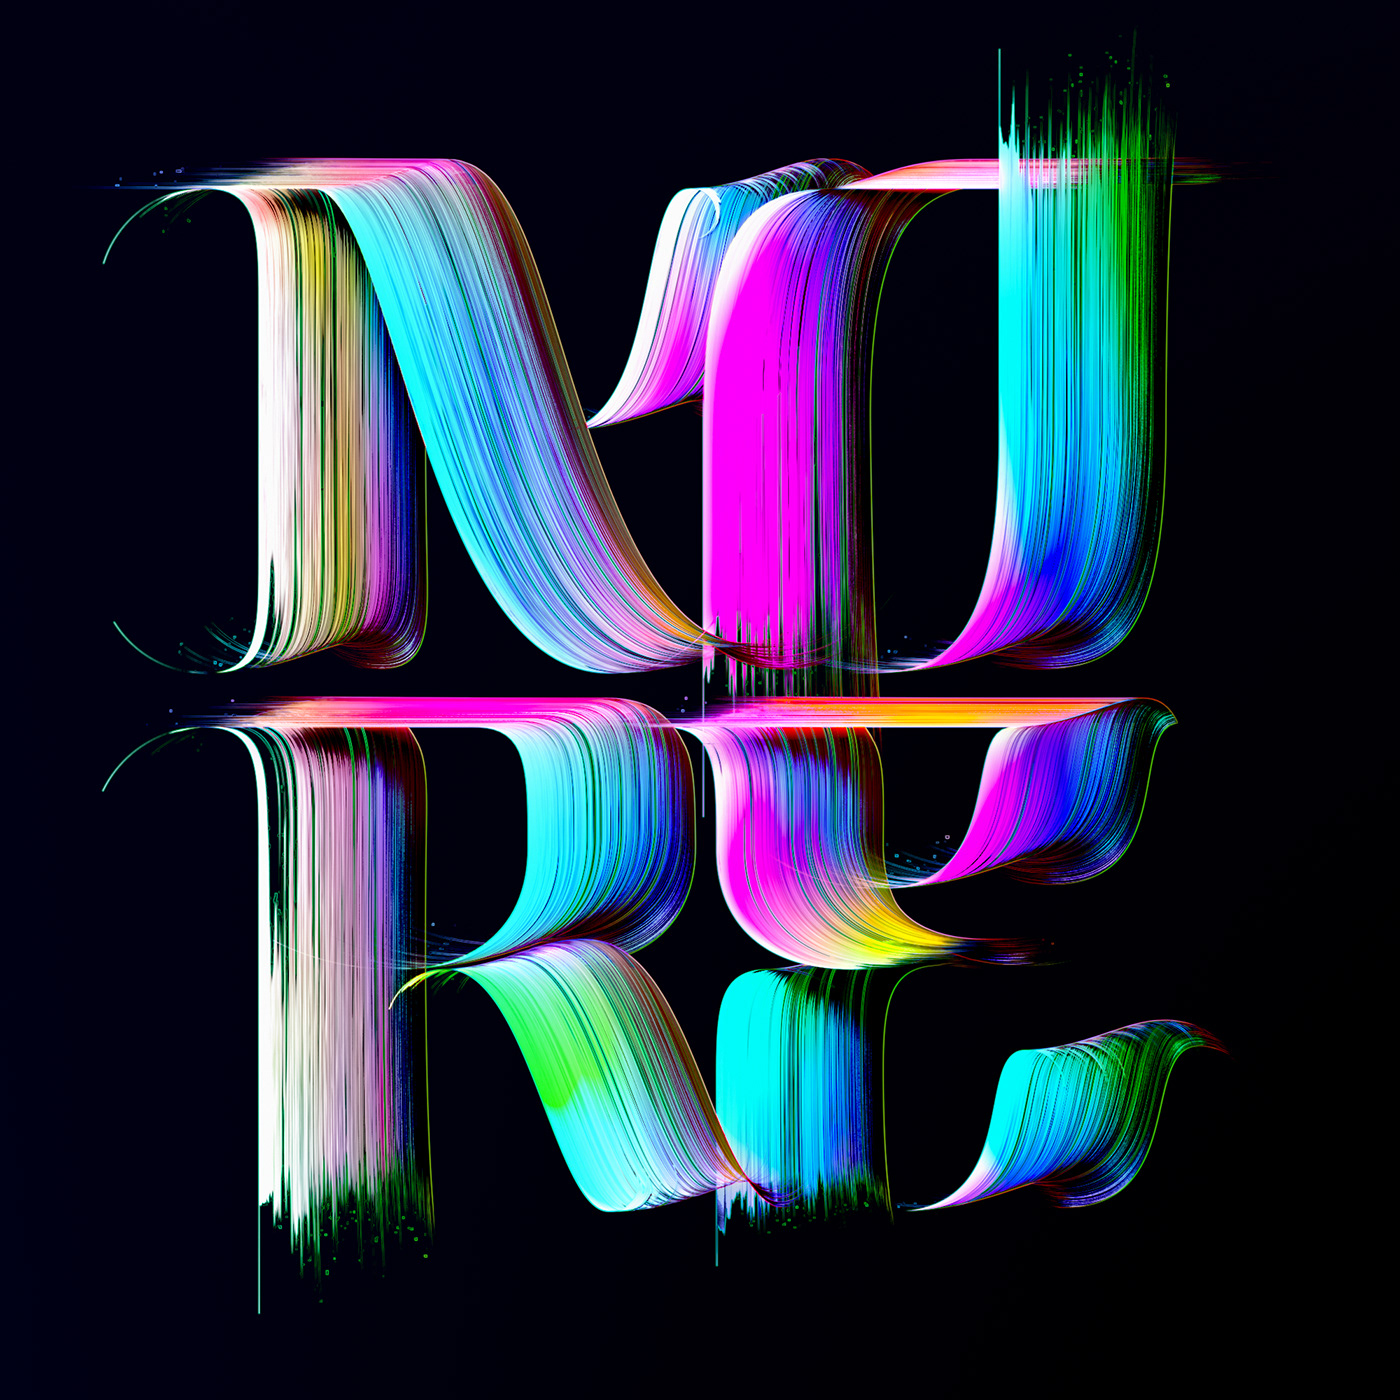 3D typography brush Calligraphy   font lettering neon poster rough typography   vivid